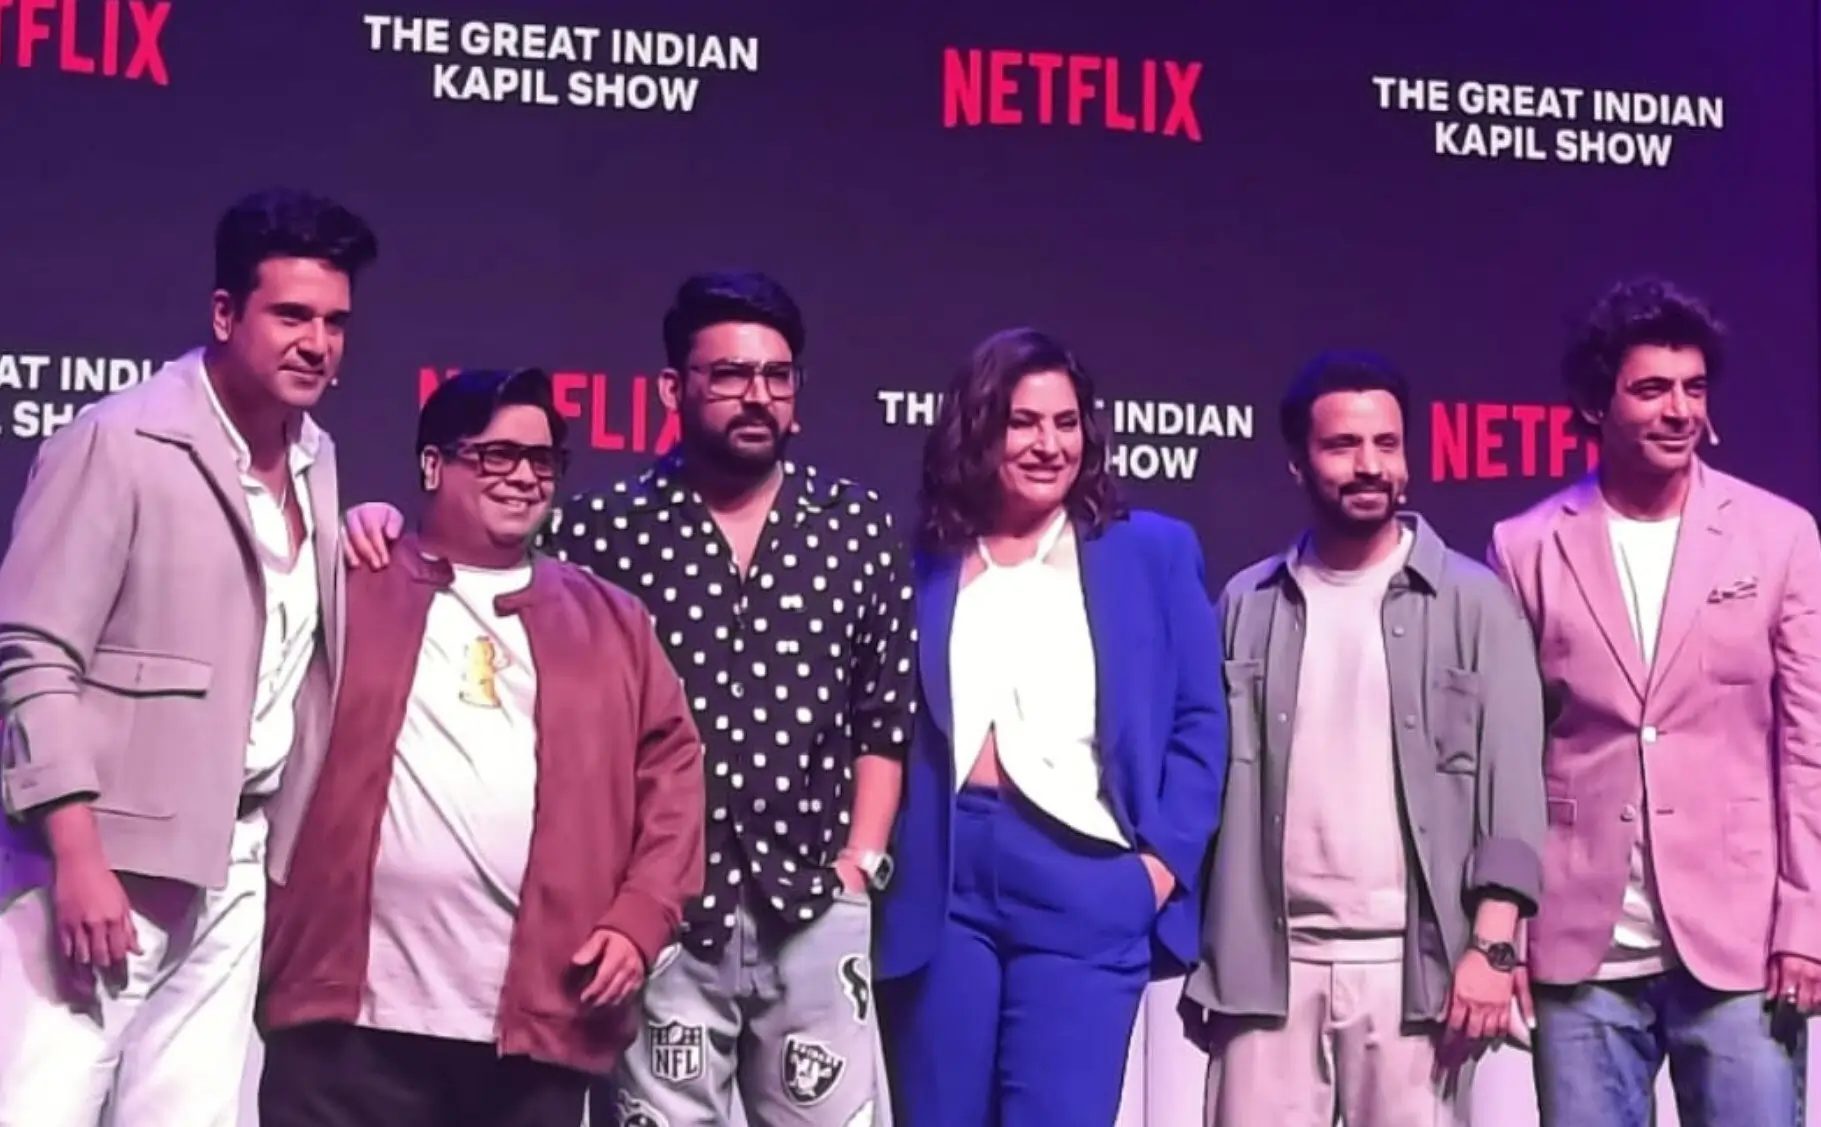 The Great Indian Kapil Show Cast